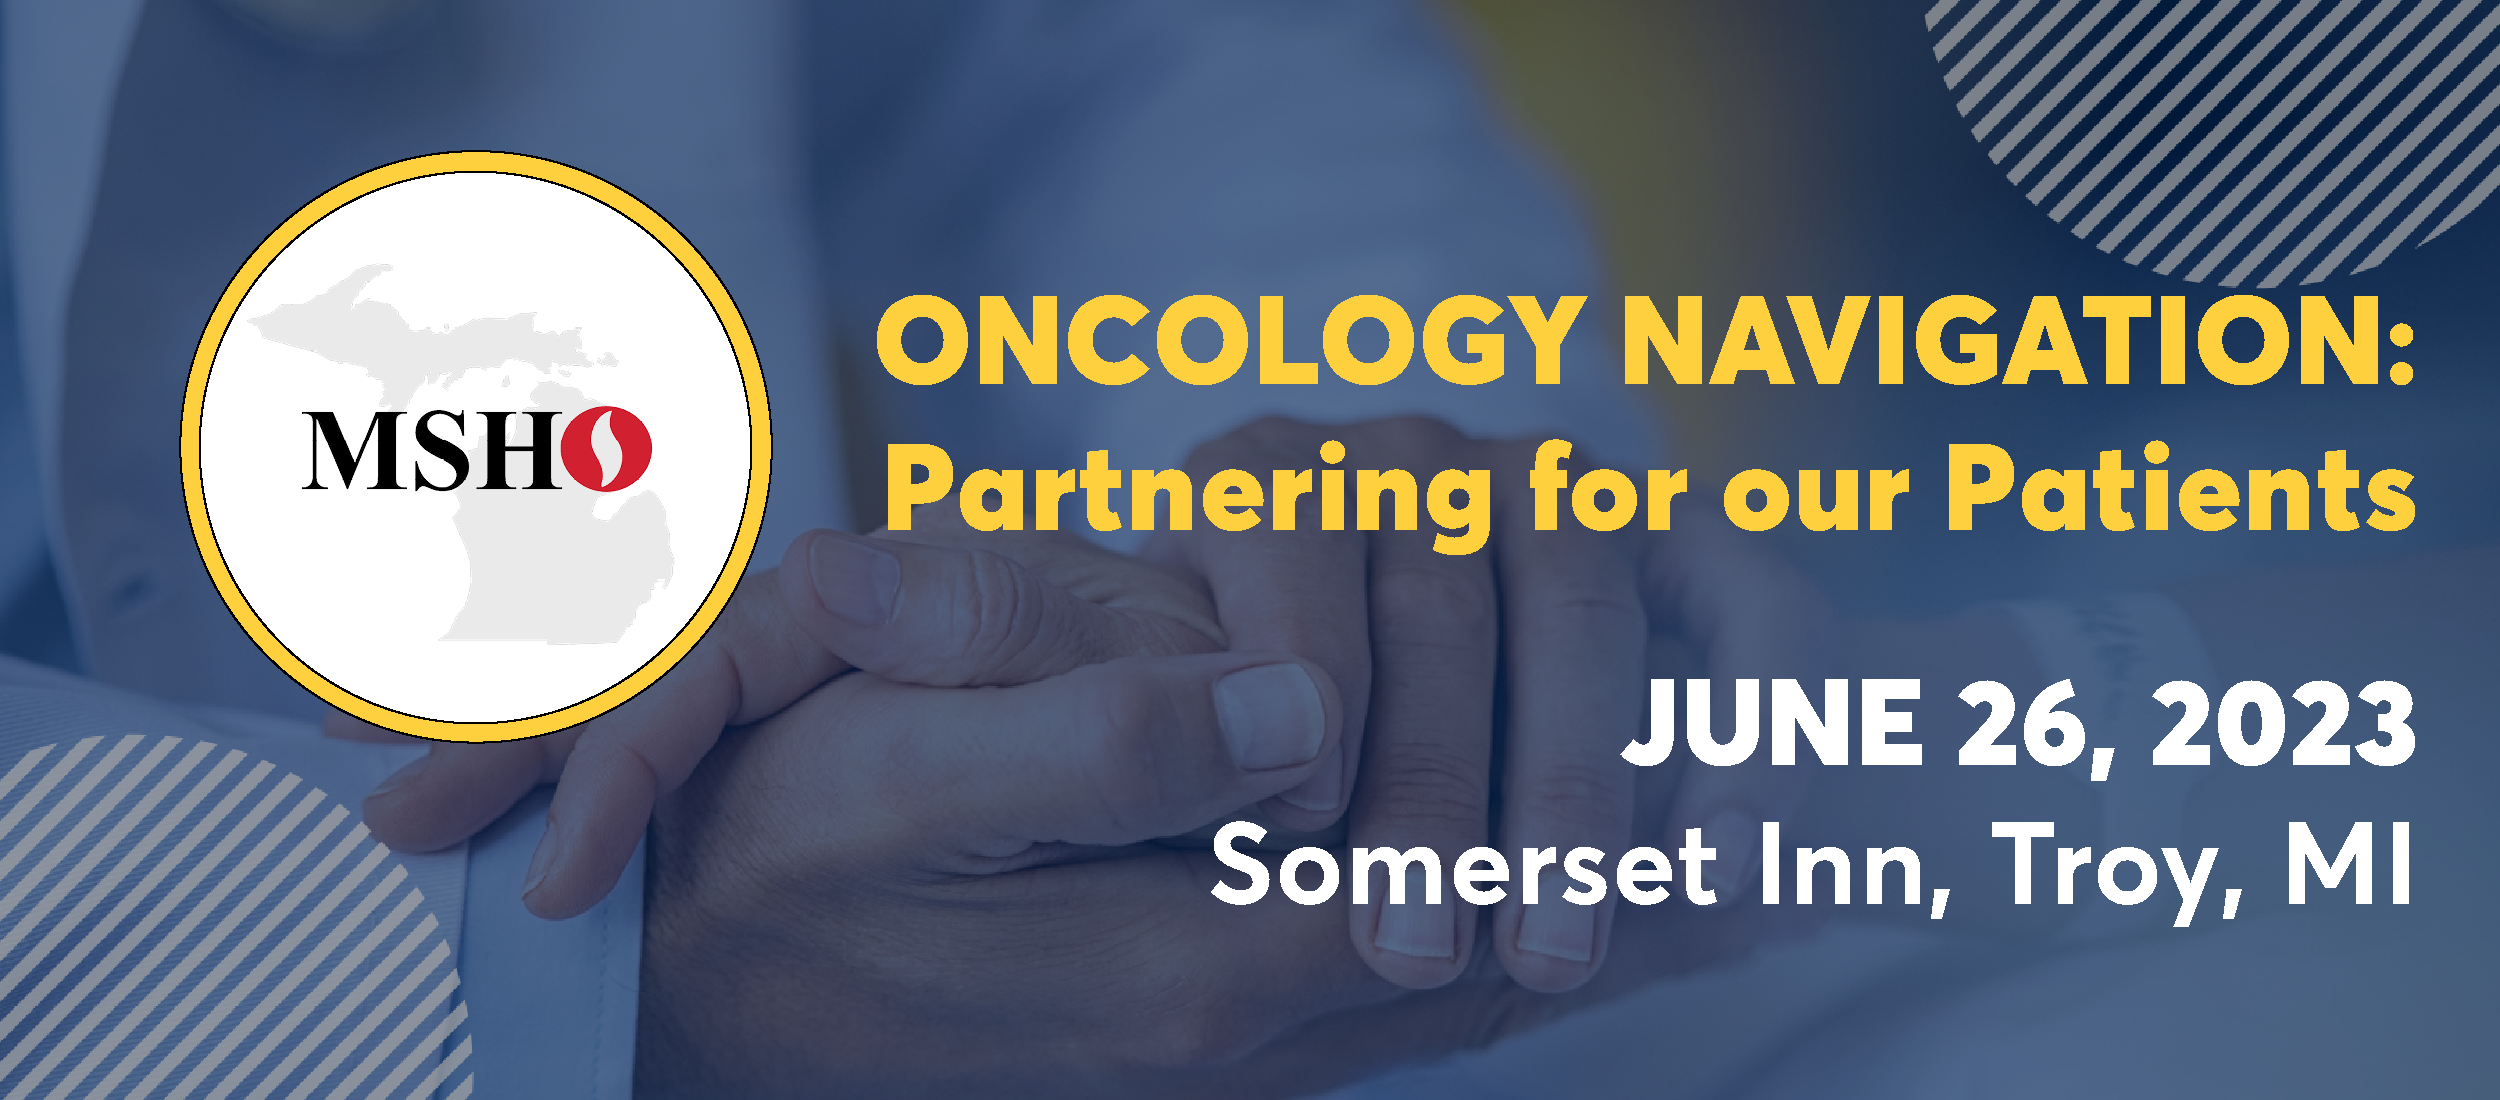 Oncology Navigation: Partnering for our Patients